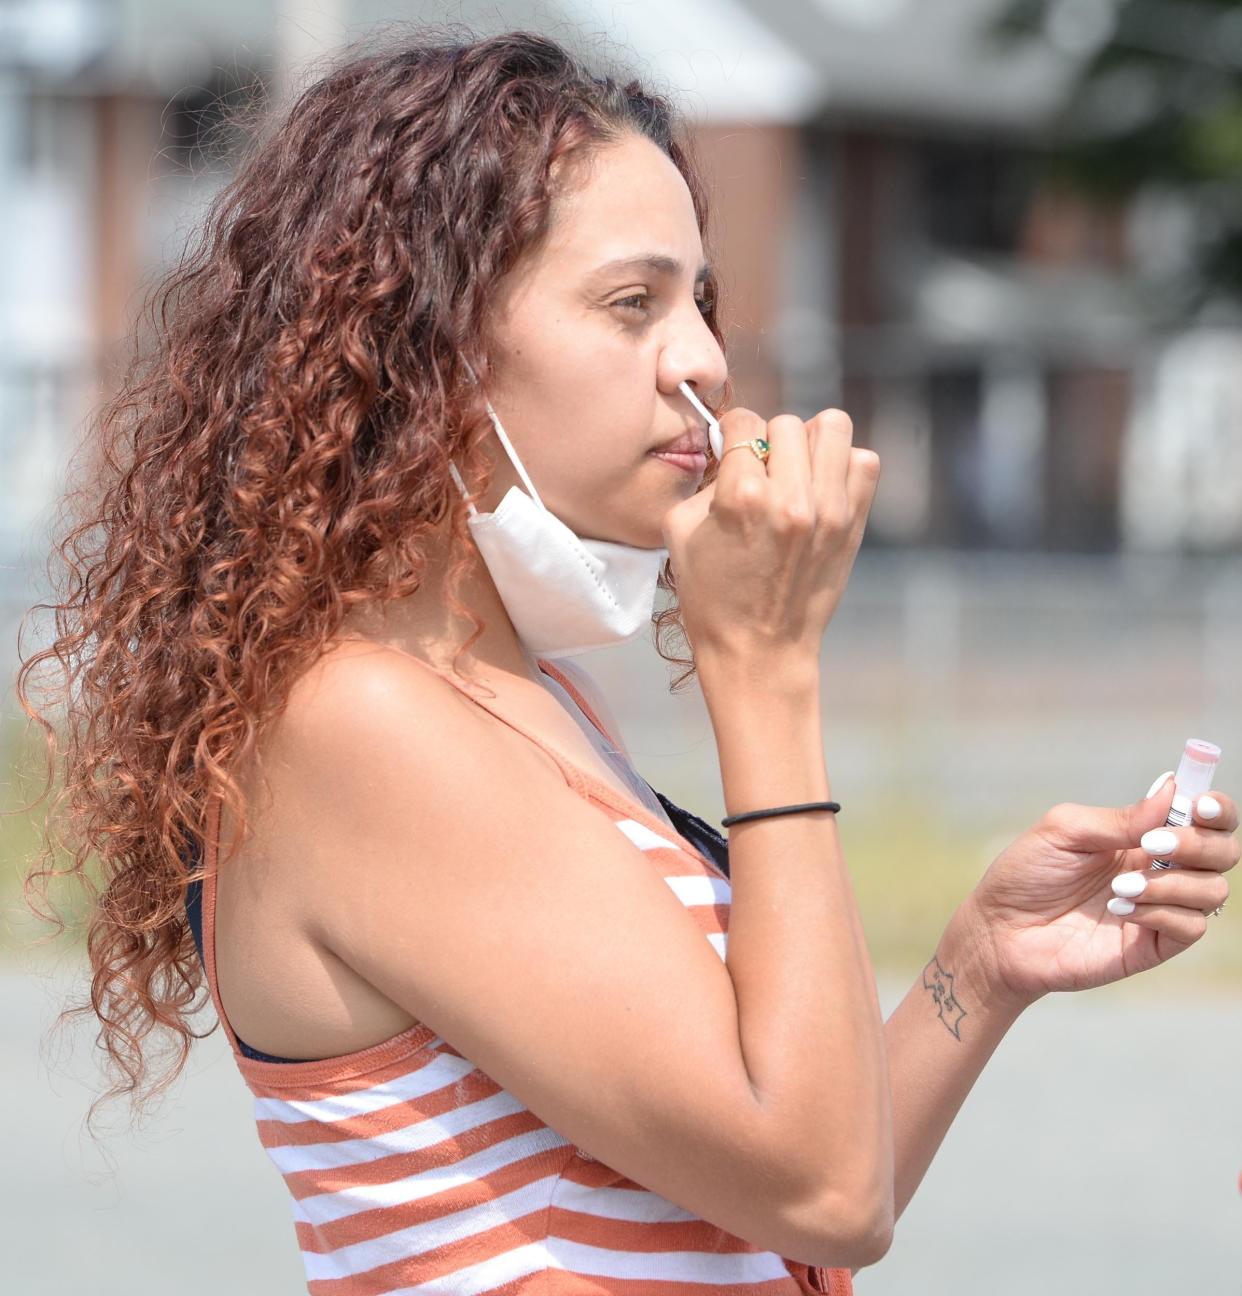 Yaritza Higgns, 27, takes a COVID-19 self test at the free, walk-up coronavirus testing site at the Crescent Court public housing complex in Brockton, run by Brockton Area Multi-Services Inc. through the state's Stop the Spread program, Thursday, Aug. 13, 2020.